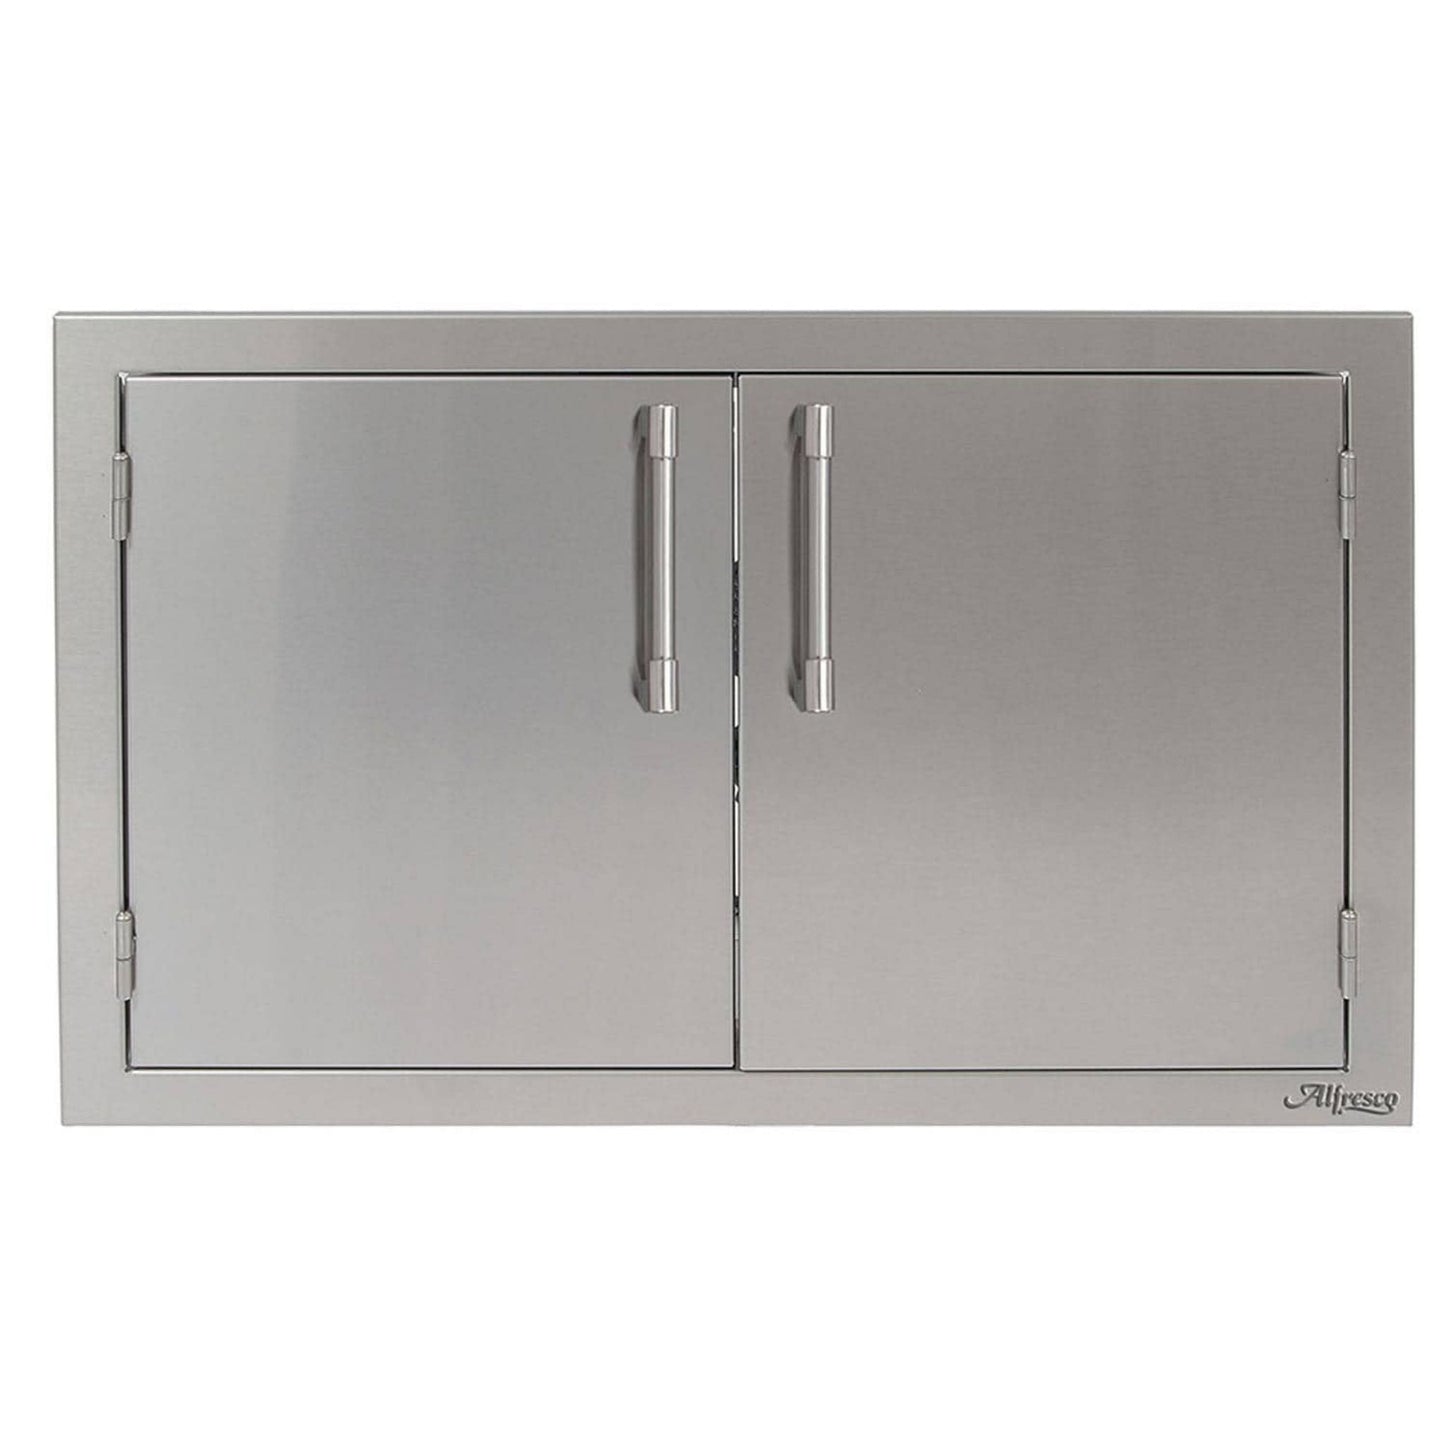 Alfresco 36" Signal White Gloss Stainless Steel Double Access Doors